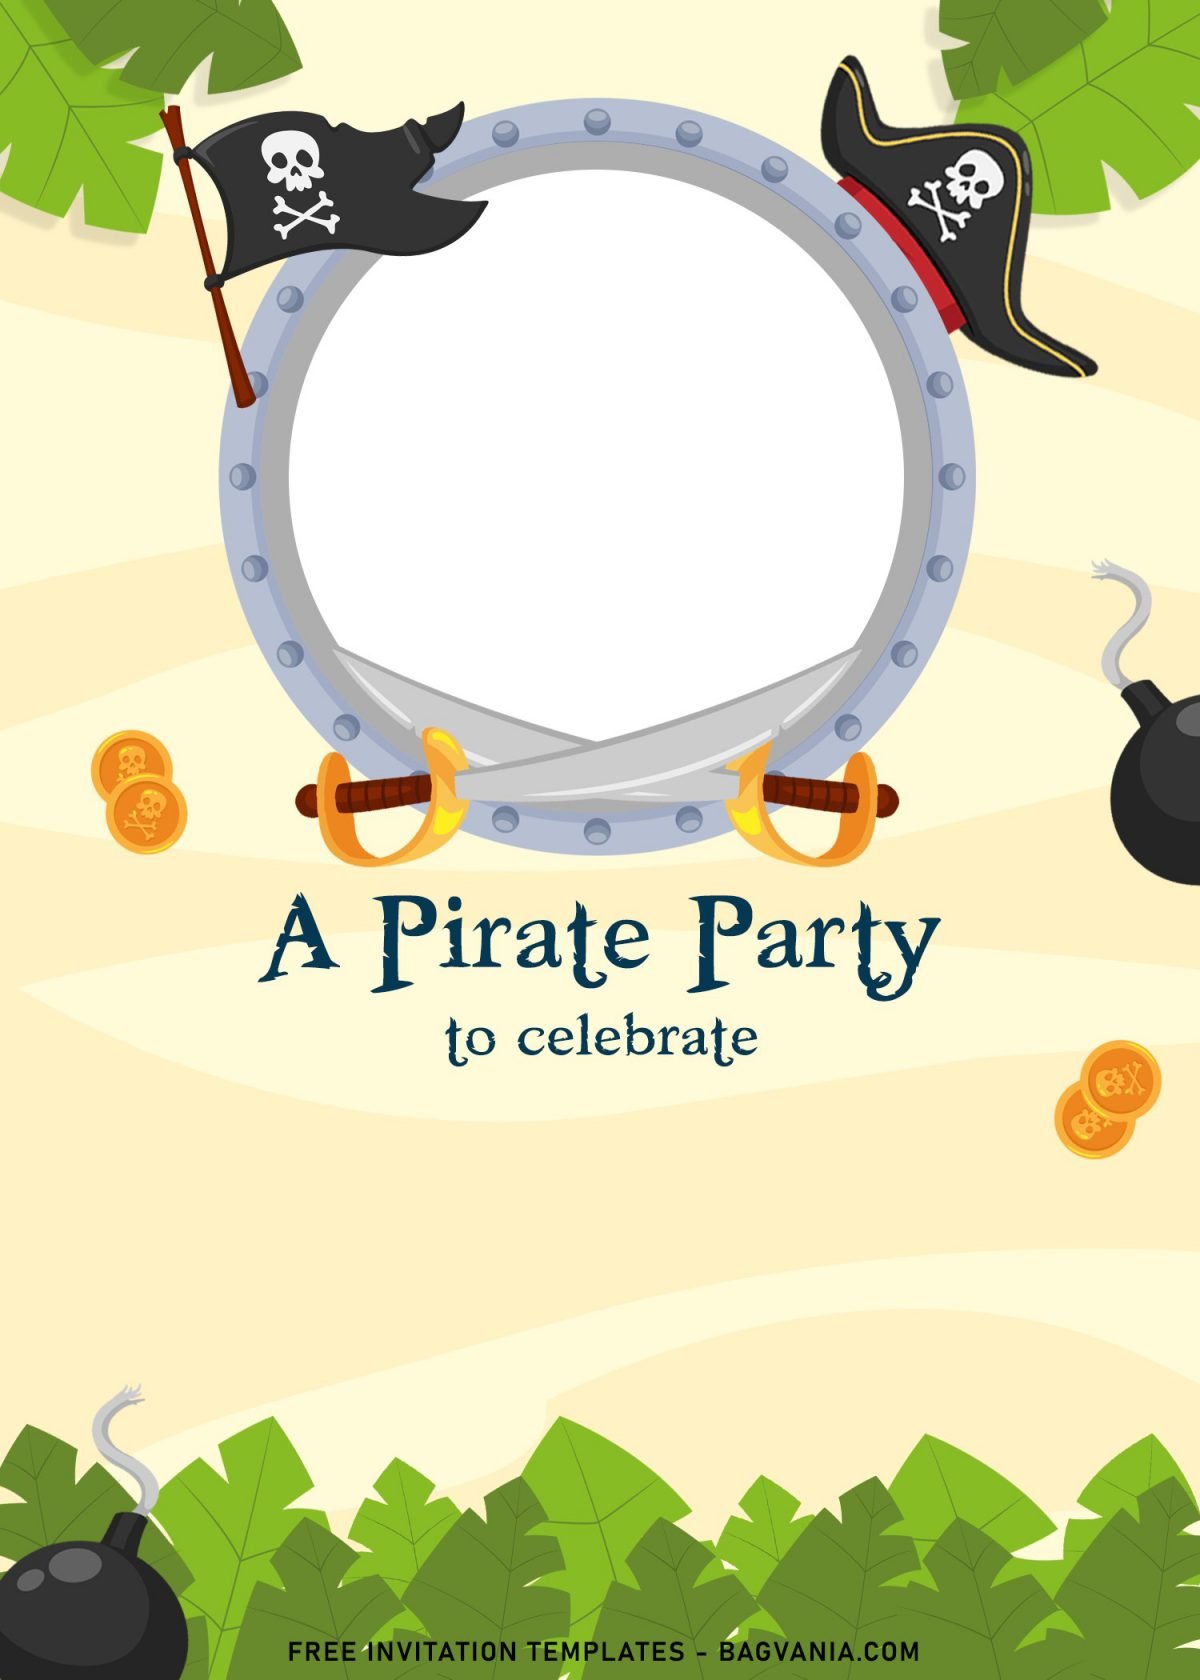 9+ Cute Pirate Birthday Invitation Templates For Your Son's Upcoming Birthday and has beautiful silhouette on its background